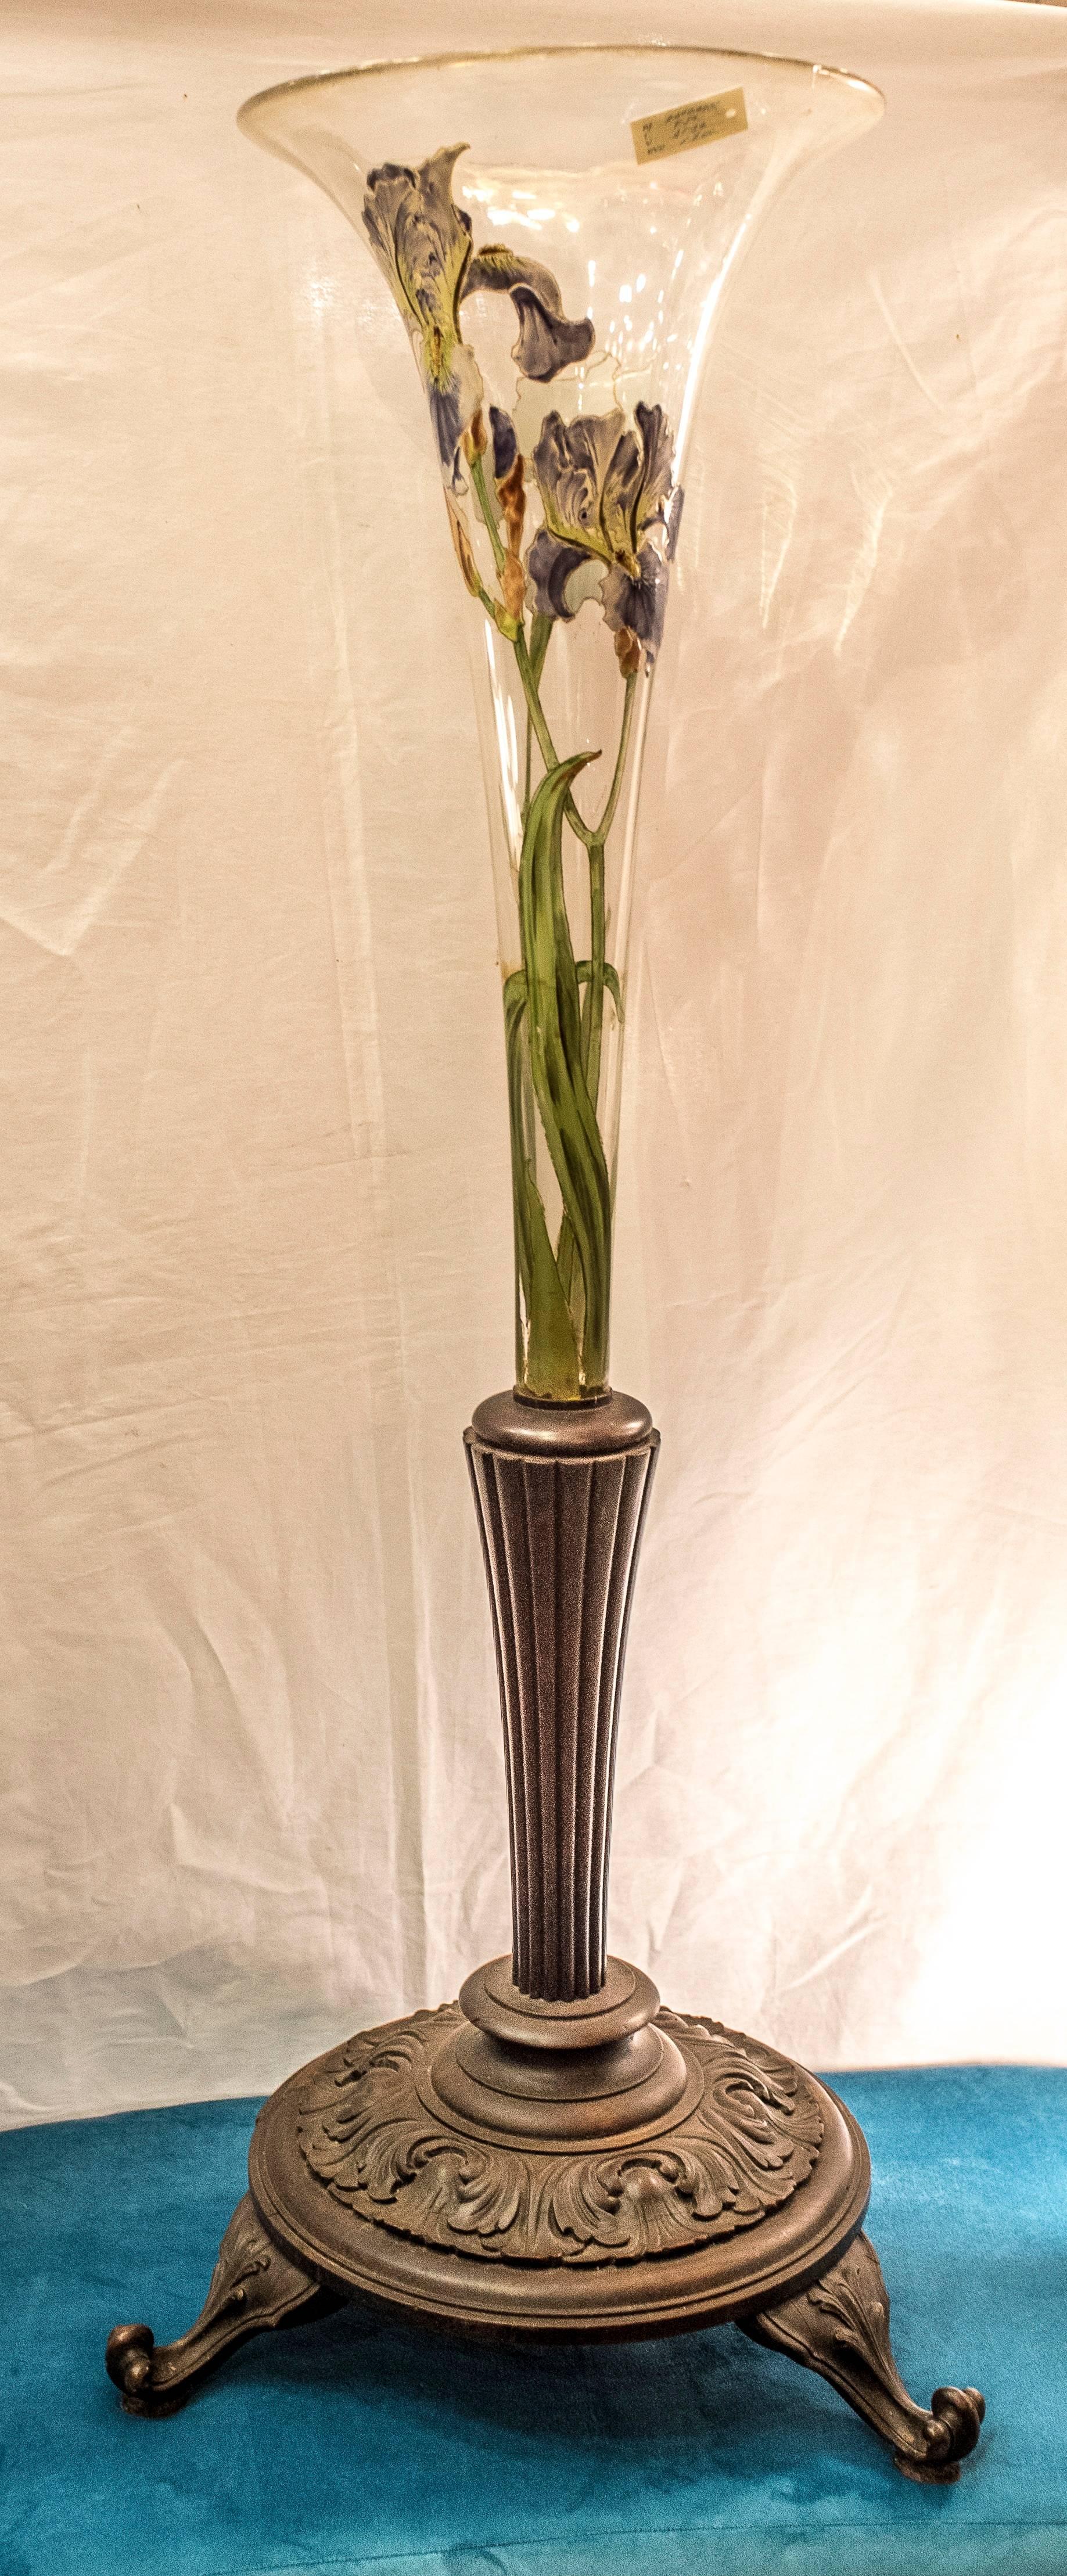 Stunning French Art Nouveau vase in blown glass, painted with iris flower. Based in carved oakwood, with 4 feet. In a perfect condition.